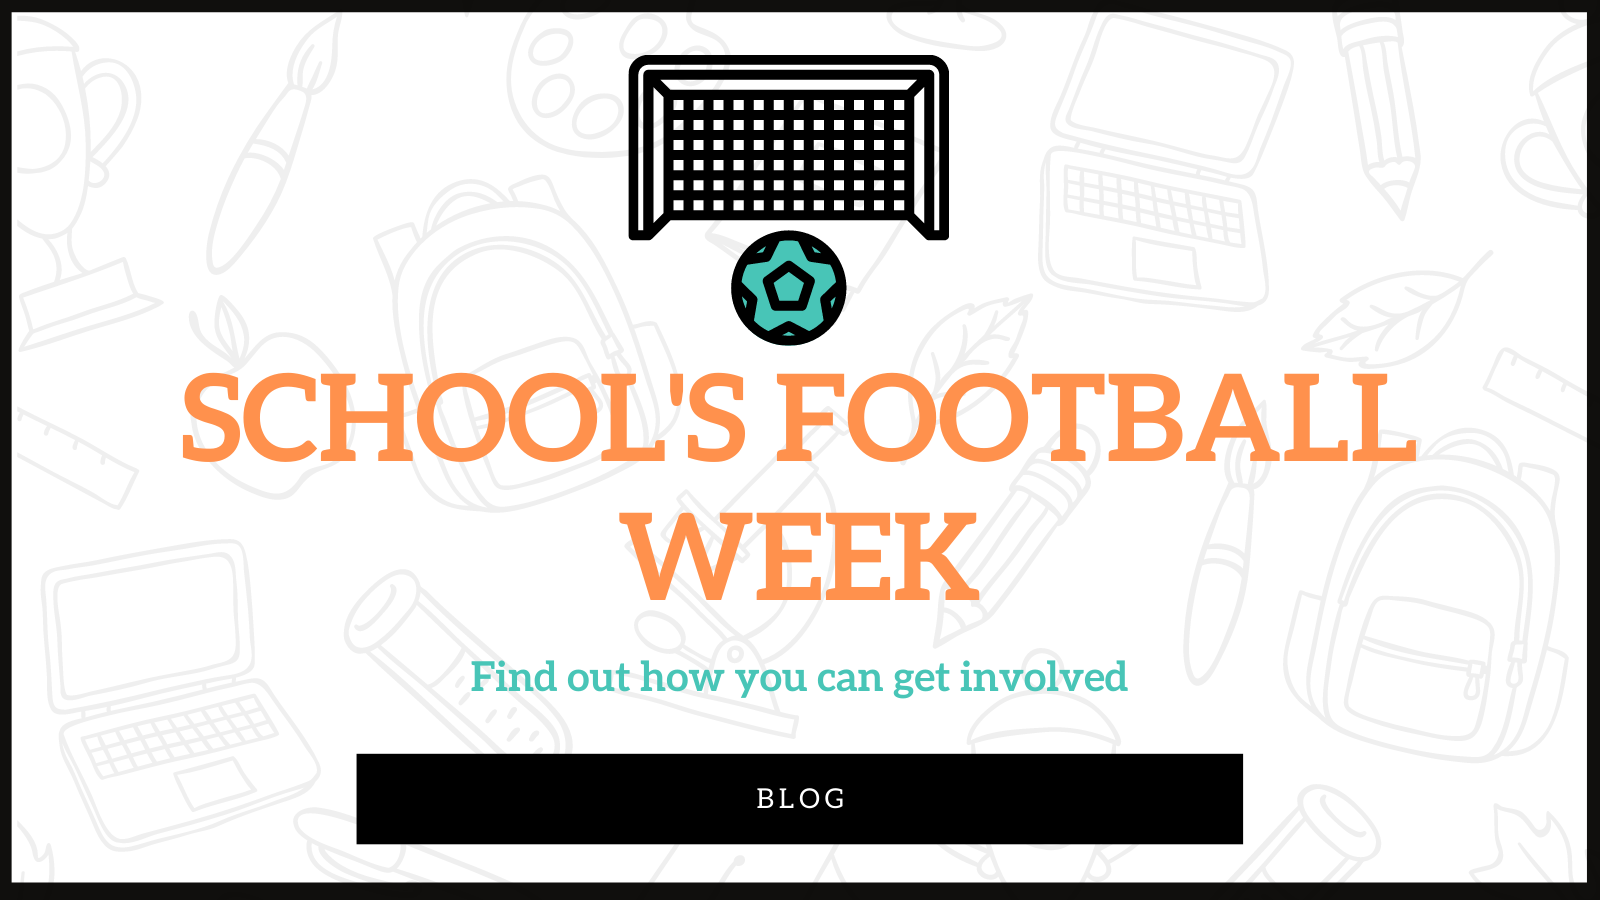 How to Get Involved In School's Football Week